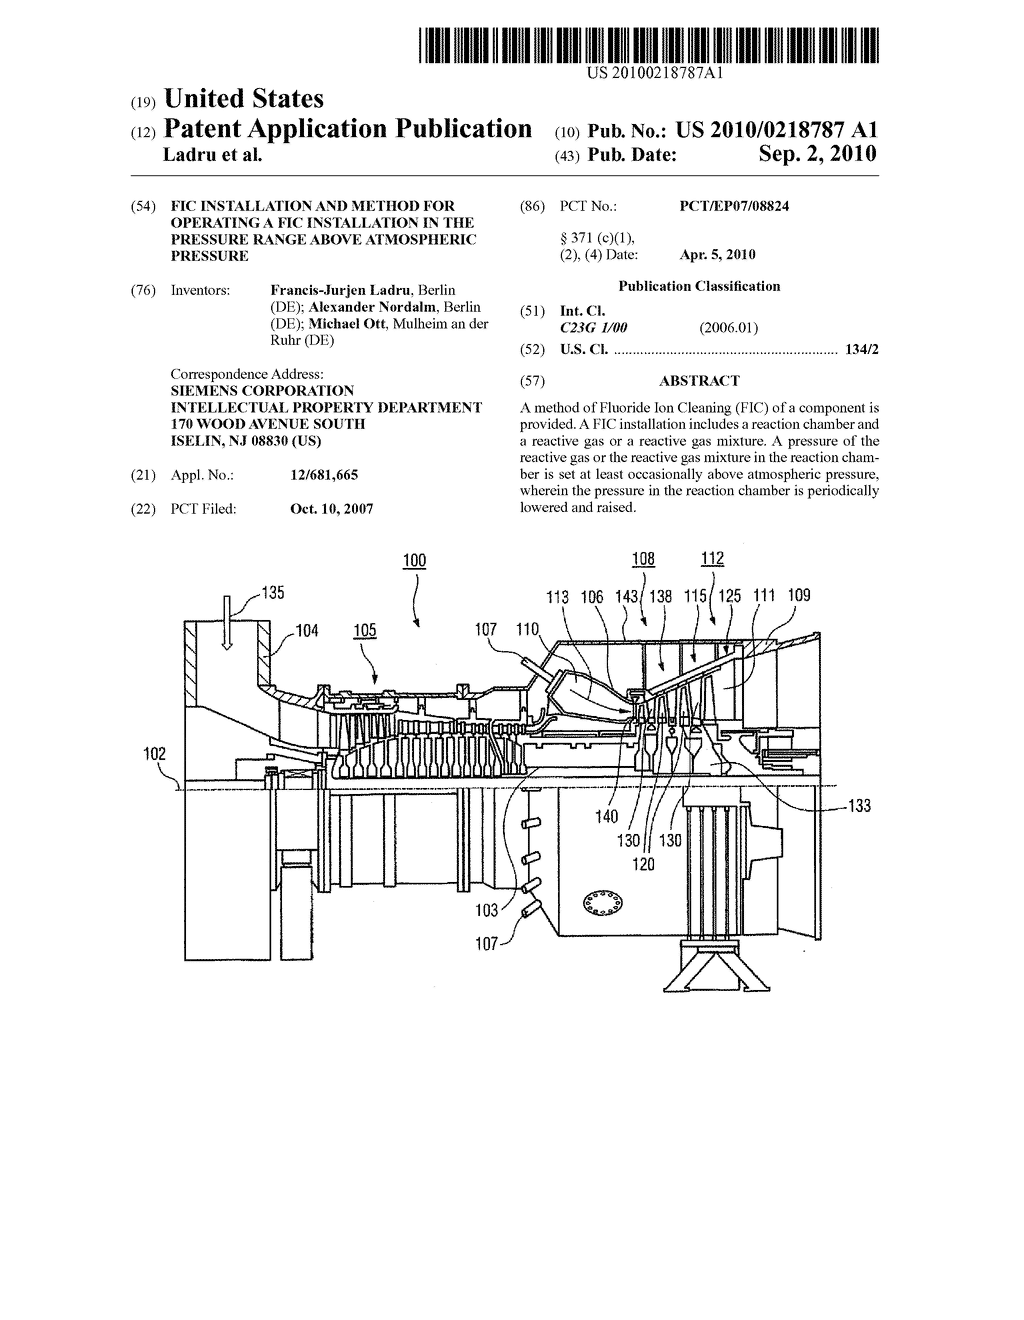 FIC Installation and Method for Operating a FIC Installation in the Pressure Range Above Atmospheric Pressure - diagram, schematic, and image 01